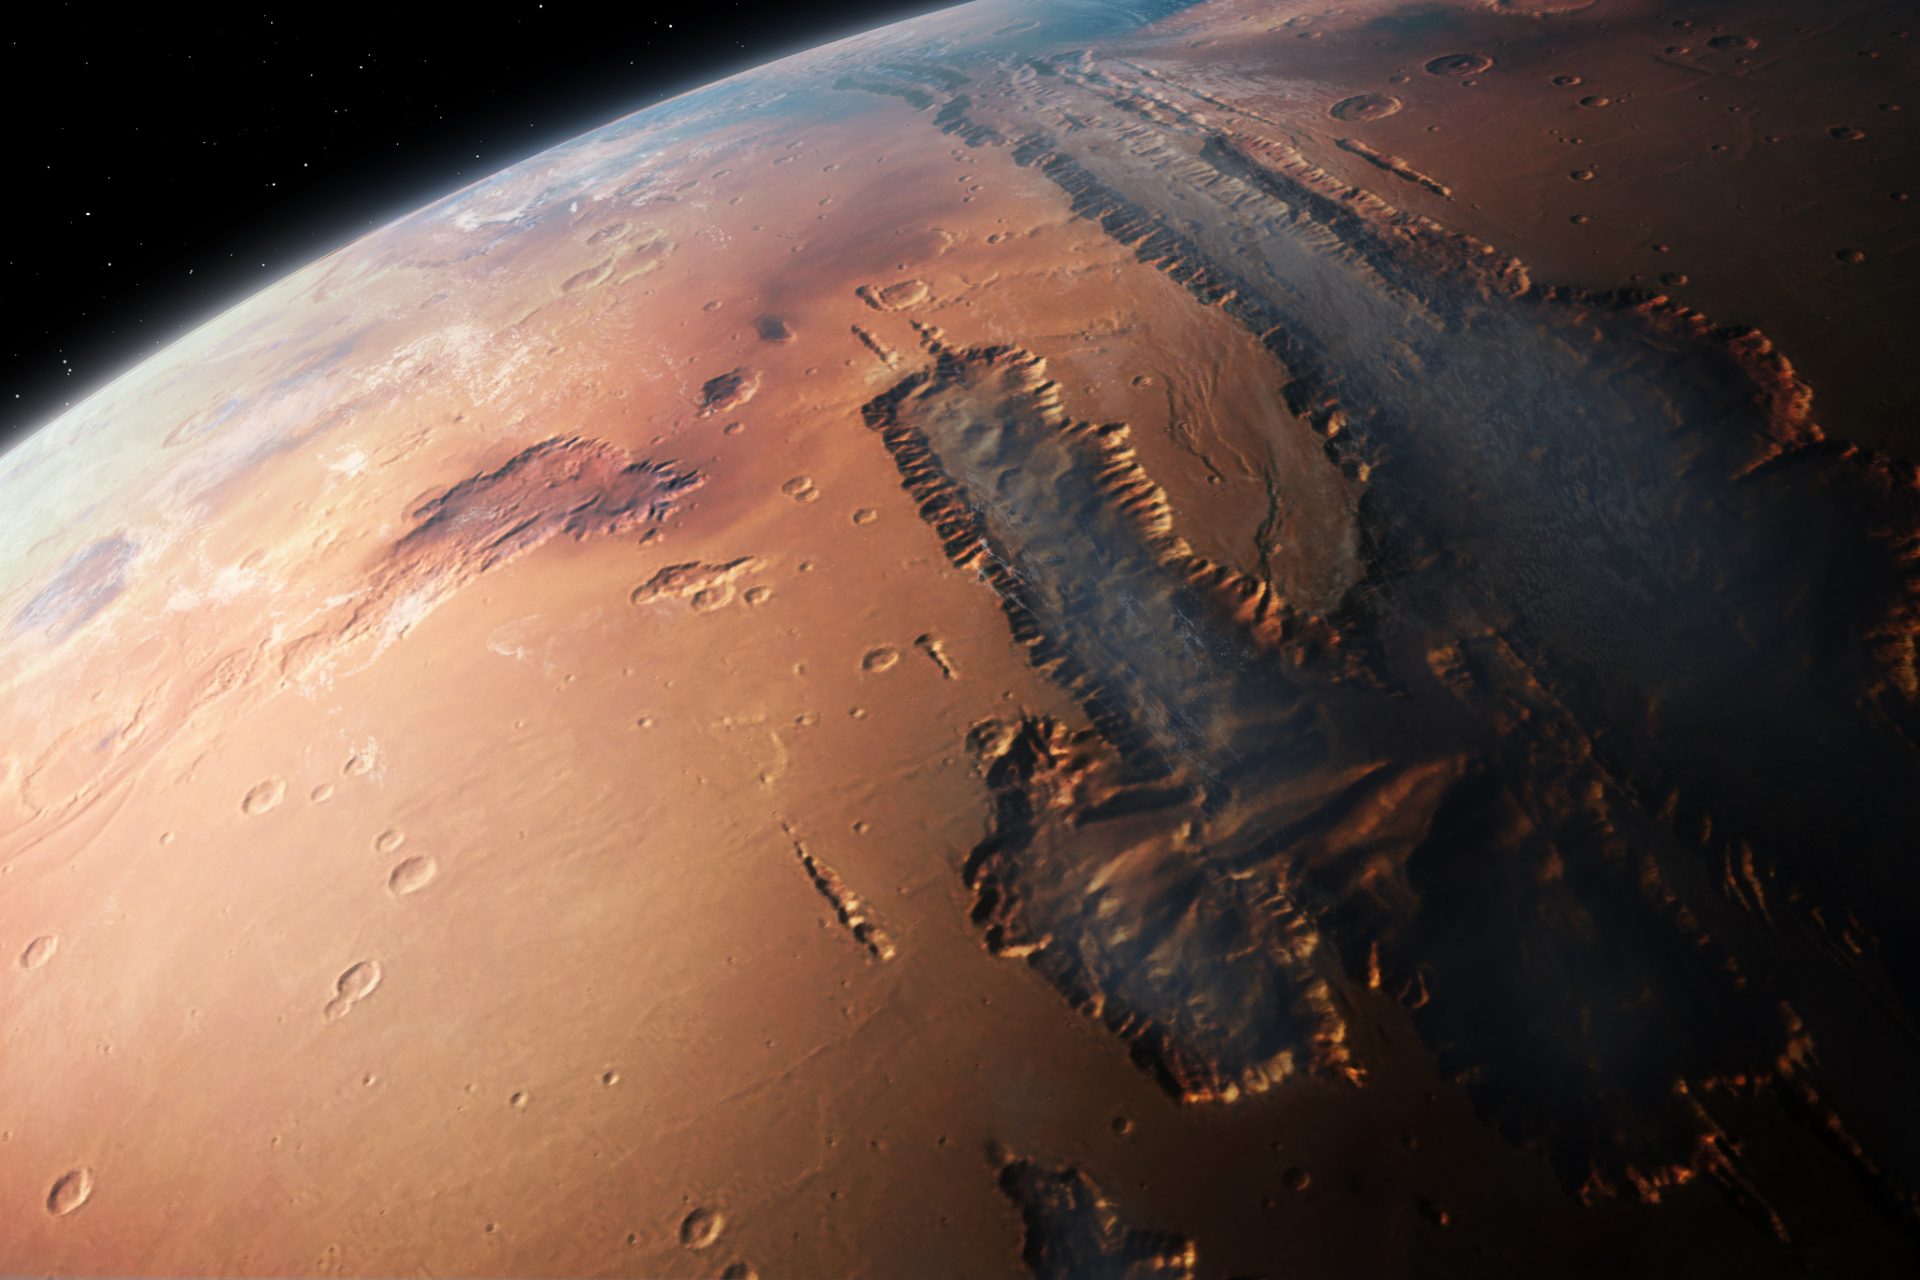 Ancient mud on Mars may be the key to proving it was once teeming with life